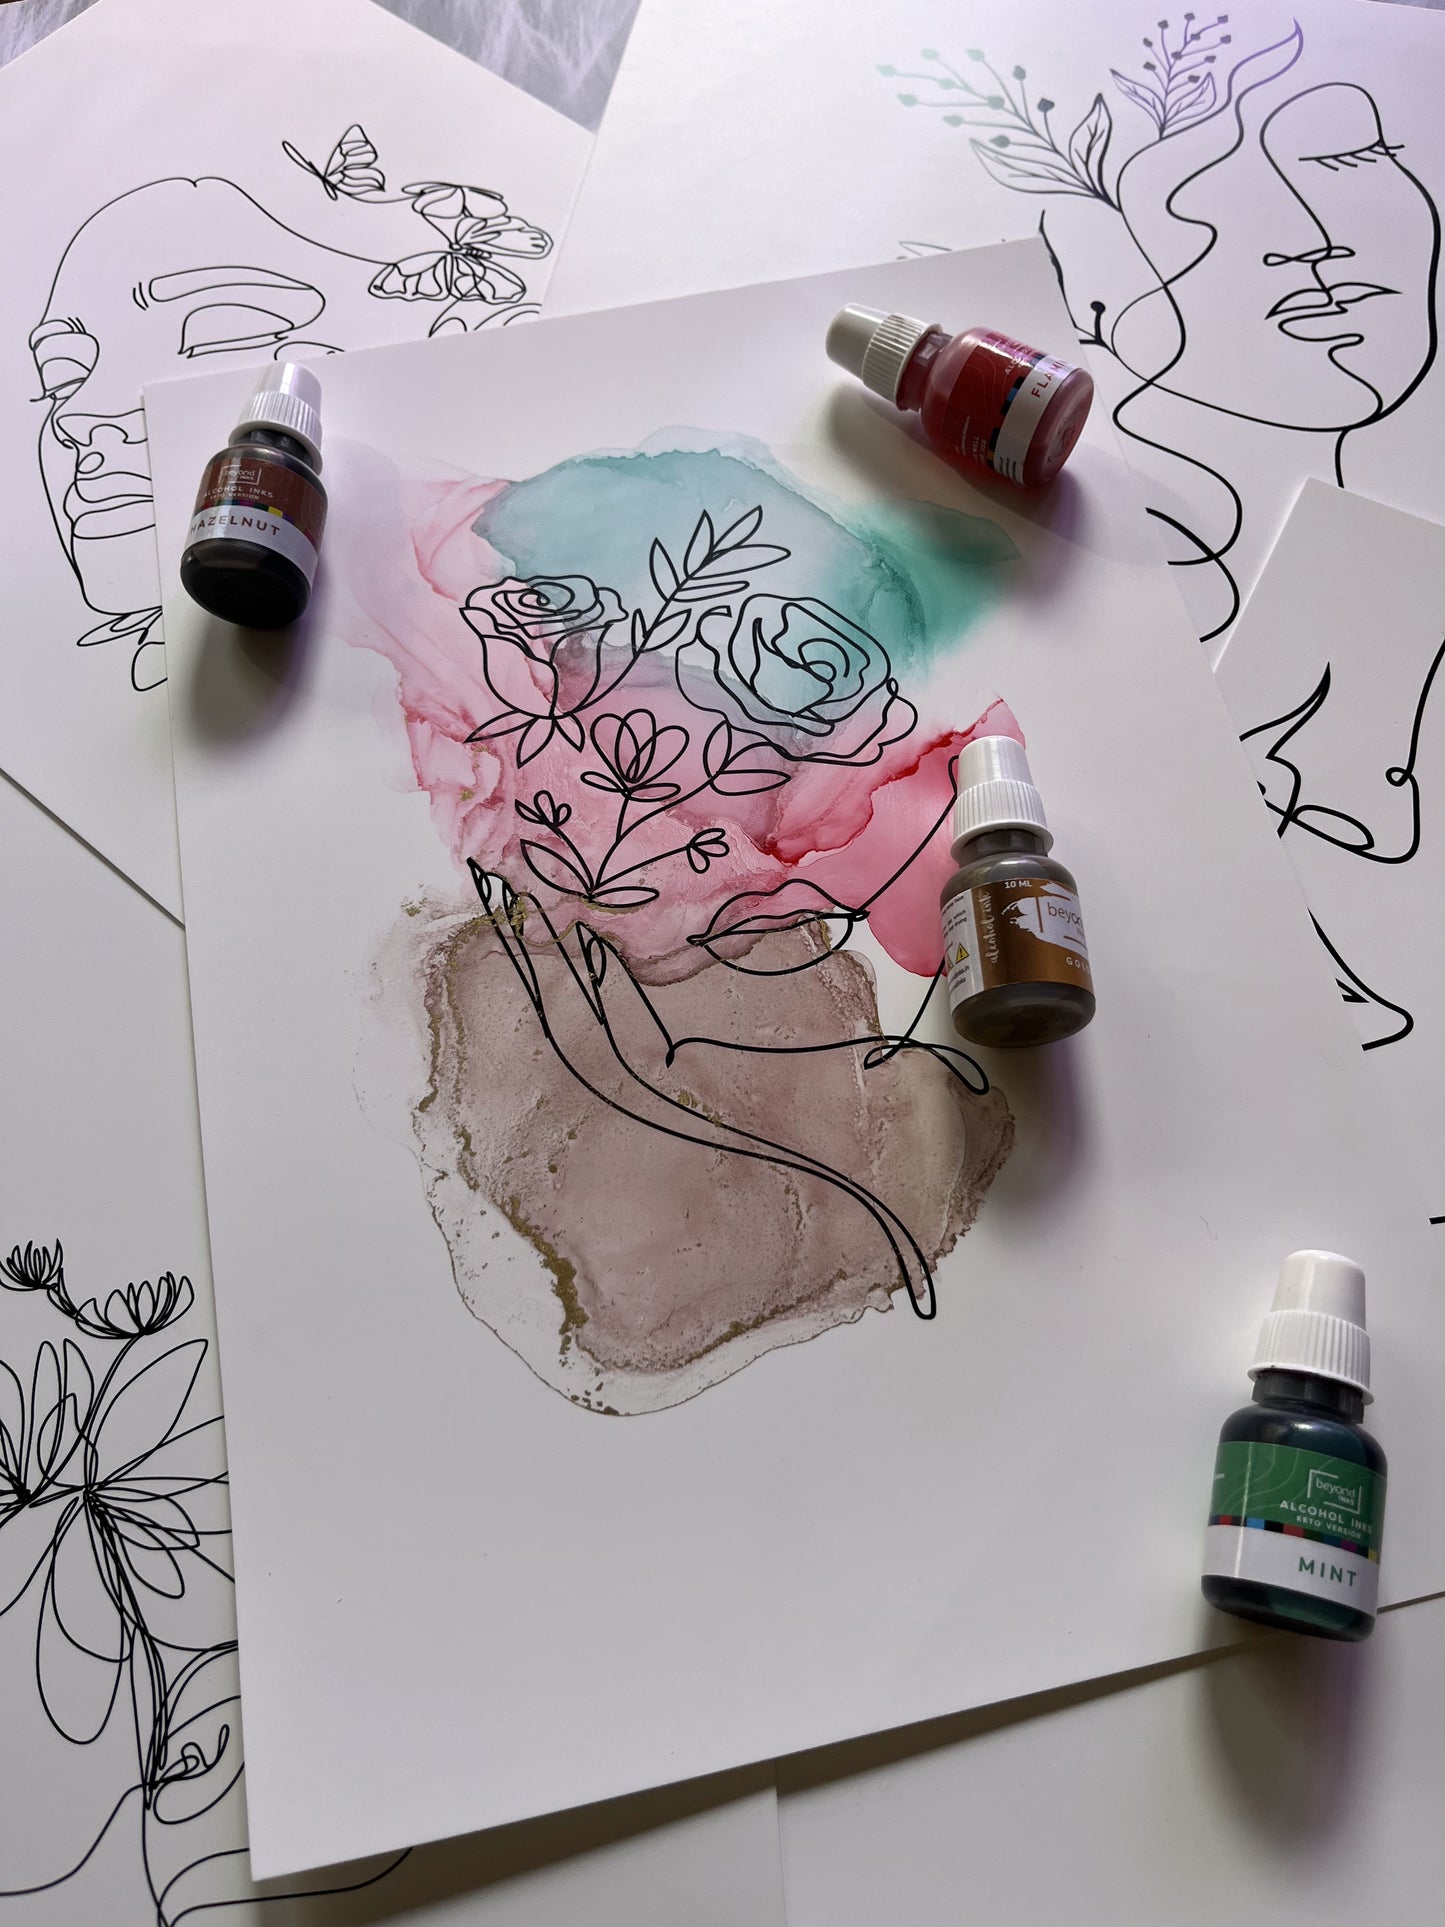 Alcohol Ink Coloring Kit - "FACES"